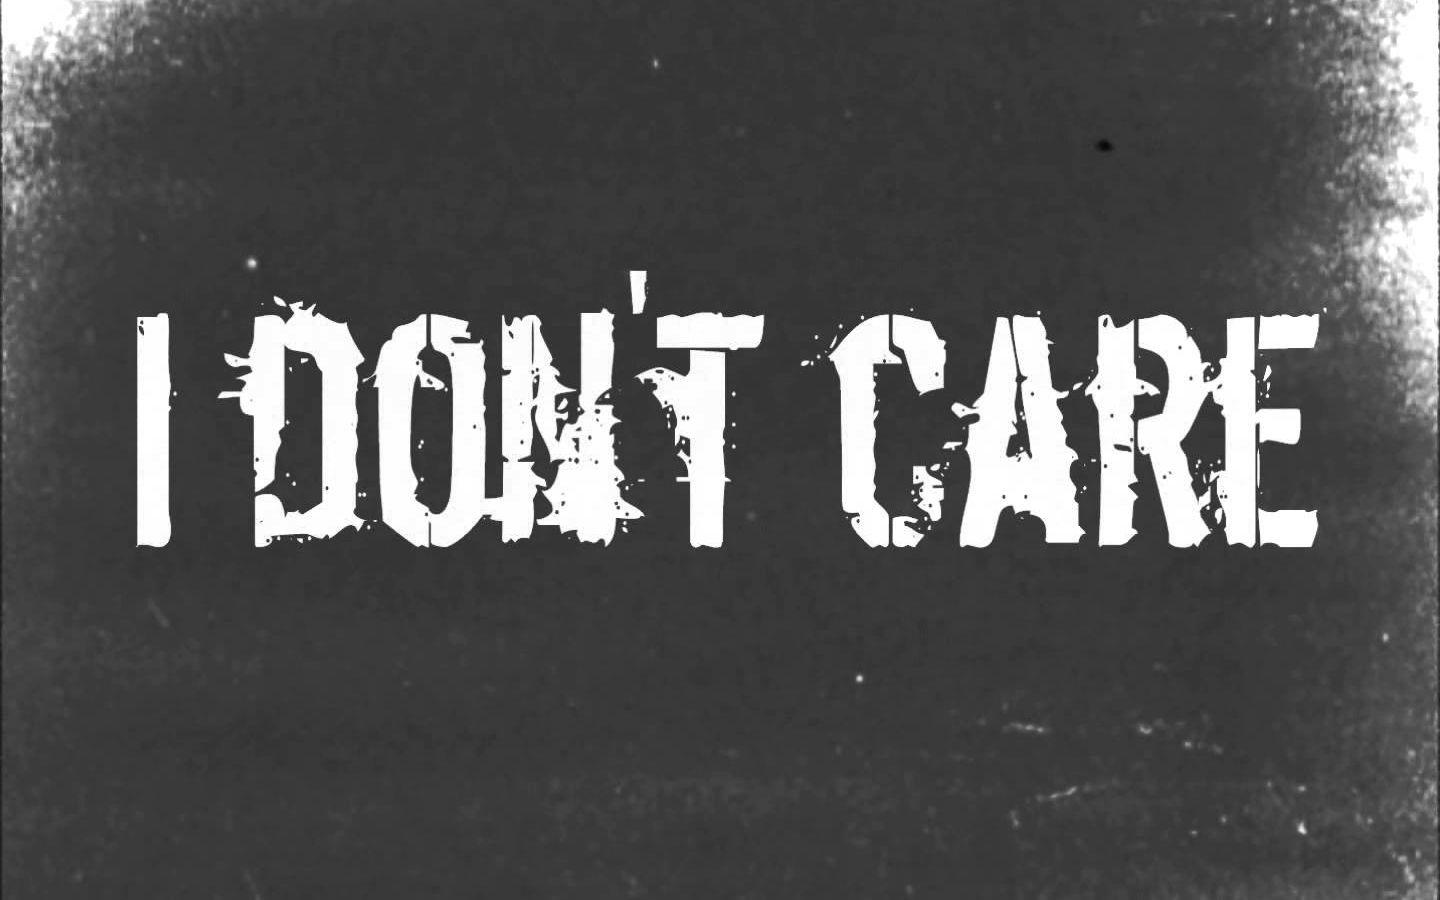 I Dont Care Wallpapers  Wallpaper Cave